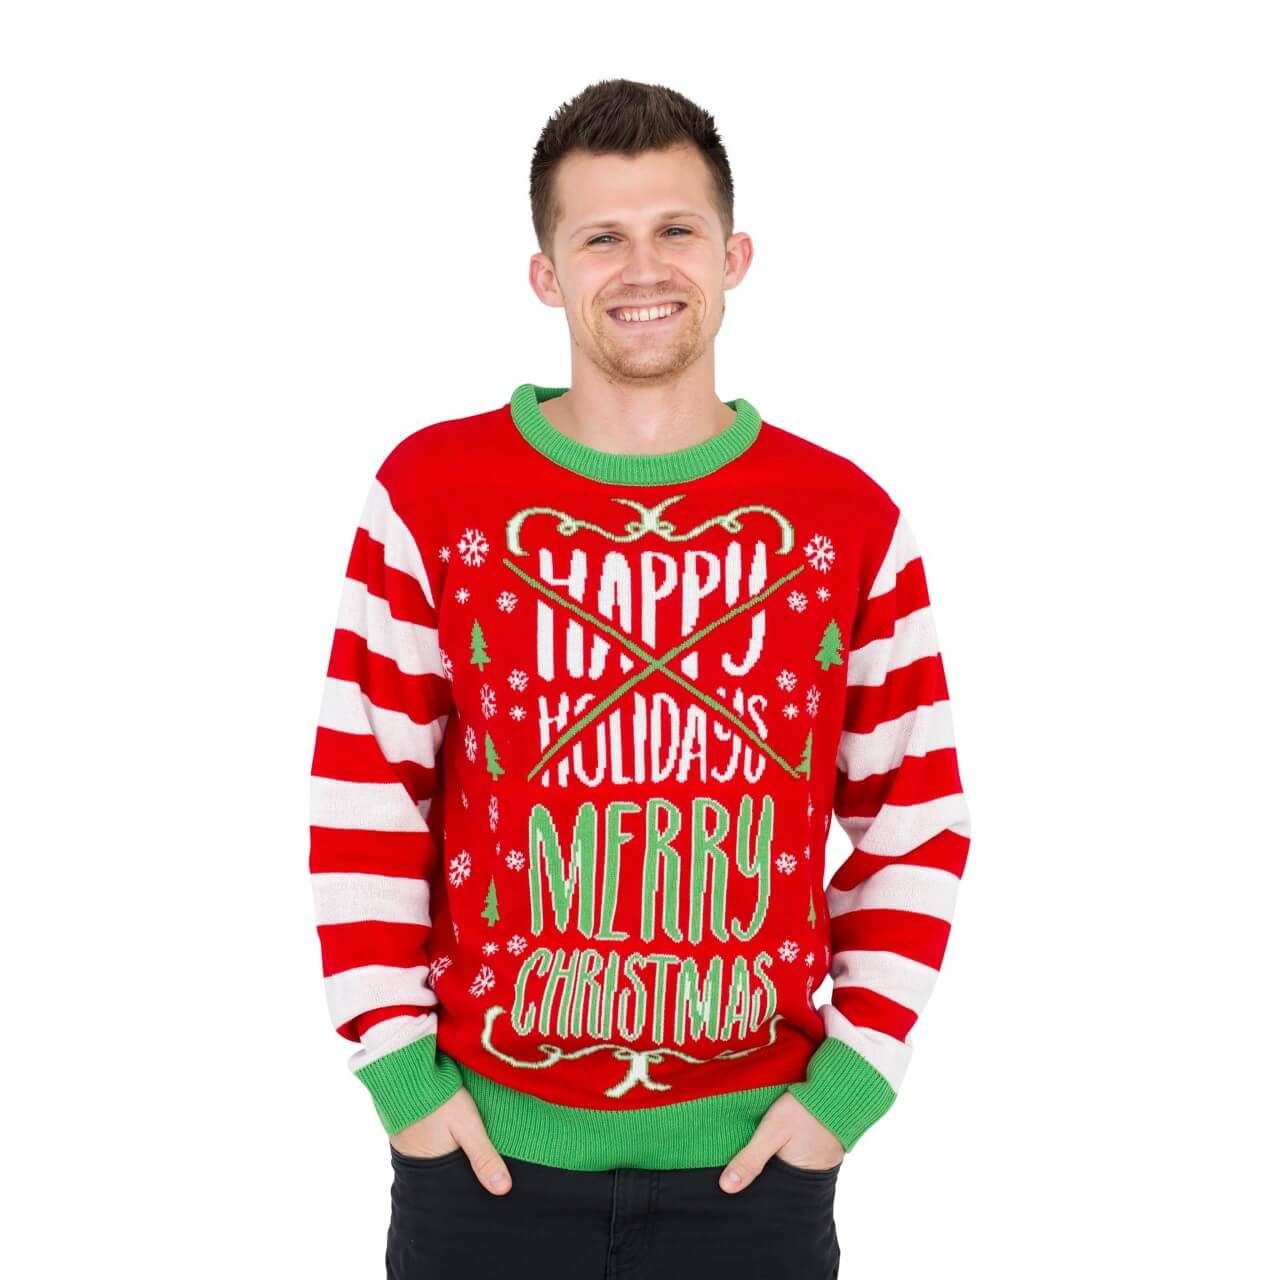 Happy Holidays Merry Christmas Sweater Ugly Christmas Sweater, All Over Print Sweatshirt, Ugly Sweater, Christmas Sweaters, Hoodie, Sweater